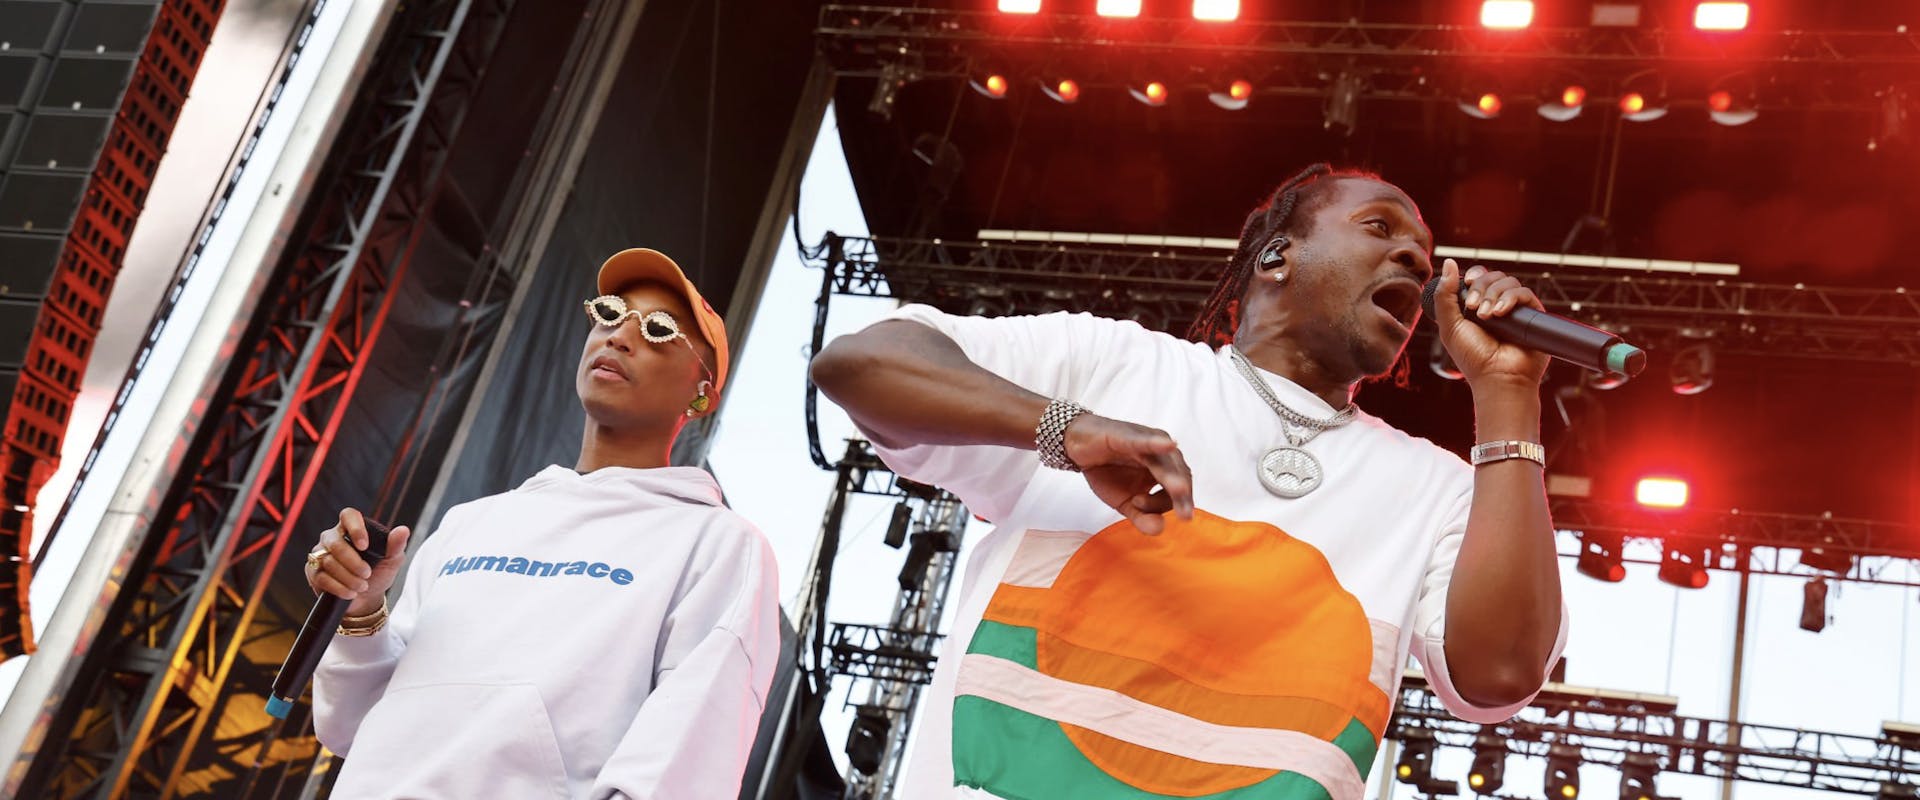 Pharrell and Pusha T perform at the 2022 Something in the Water Music Festival on Independence Avenue on June 19, 2022 in Washington, DC. (Photo by Paul Morigi/Getty Images)